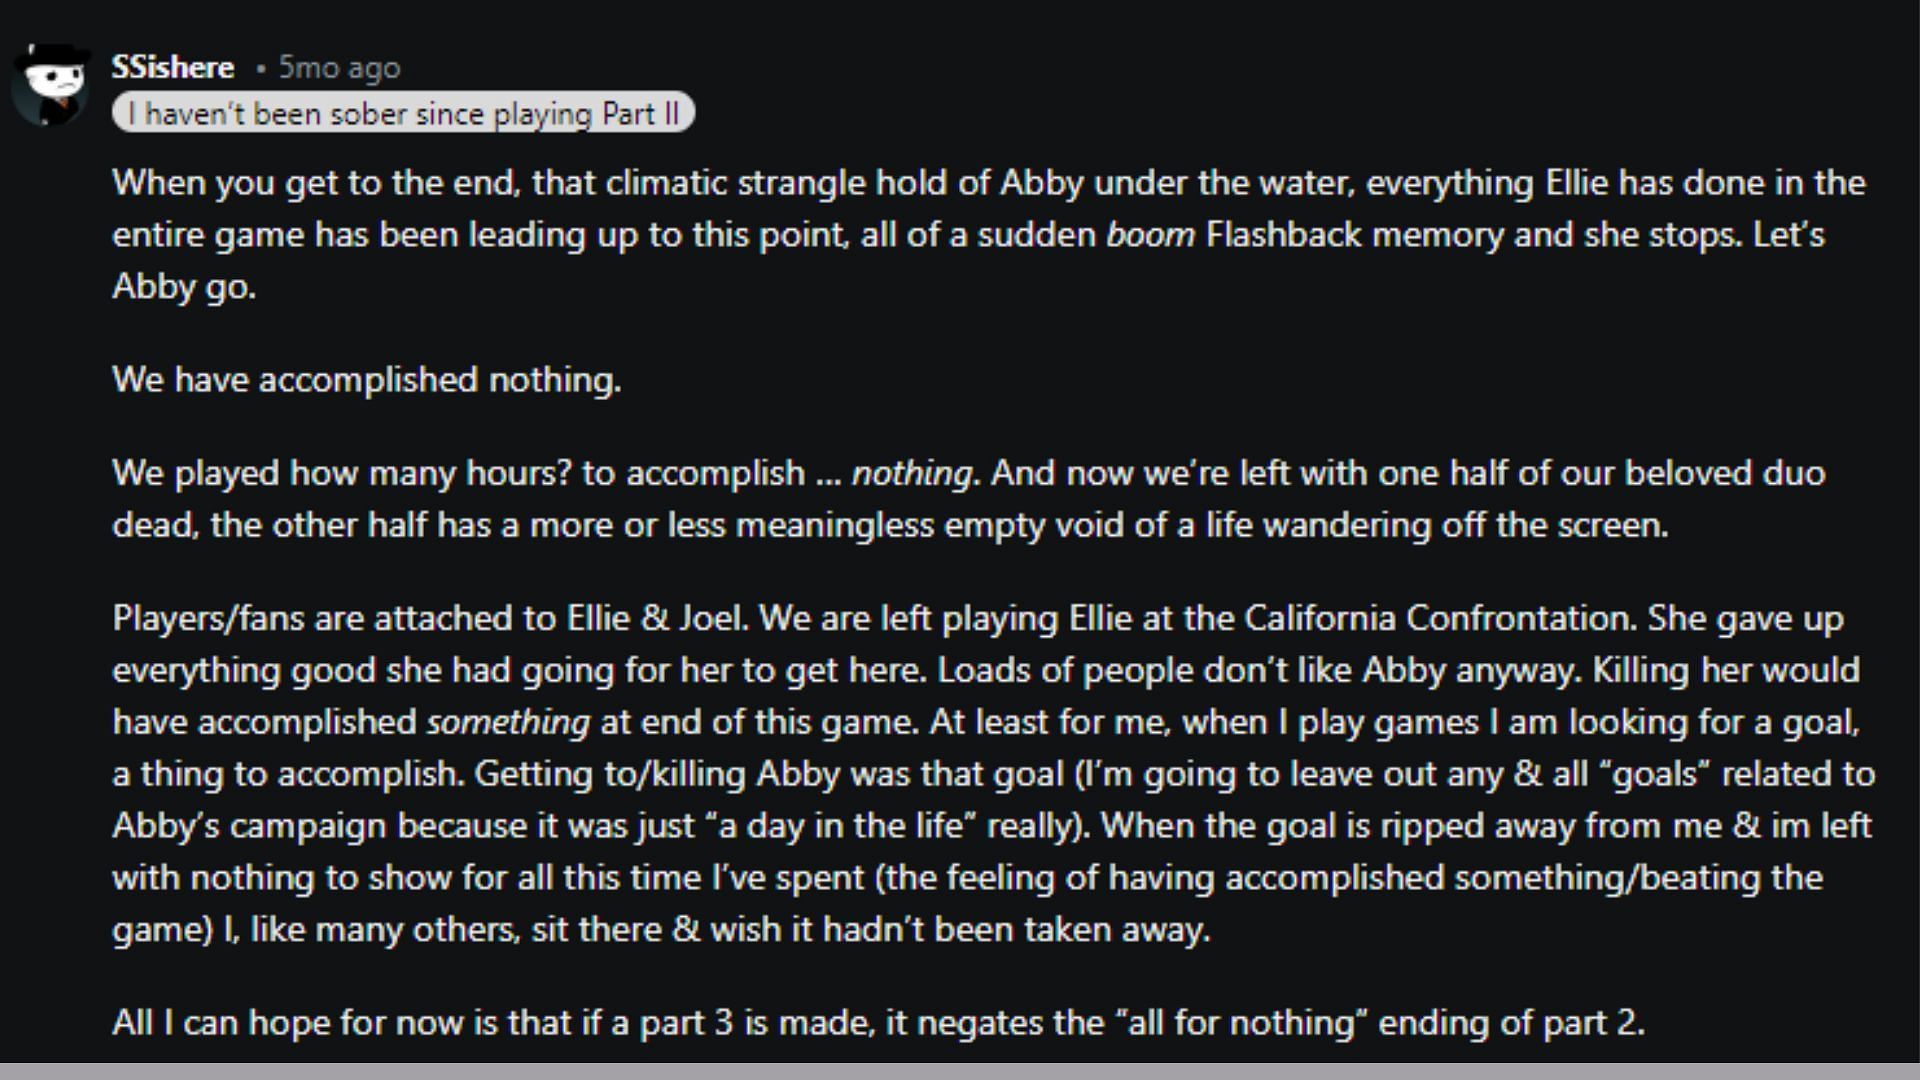 Reddit user comments on Abby being spared at the end of the game (Image via Reddit)